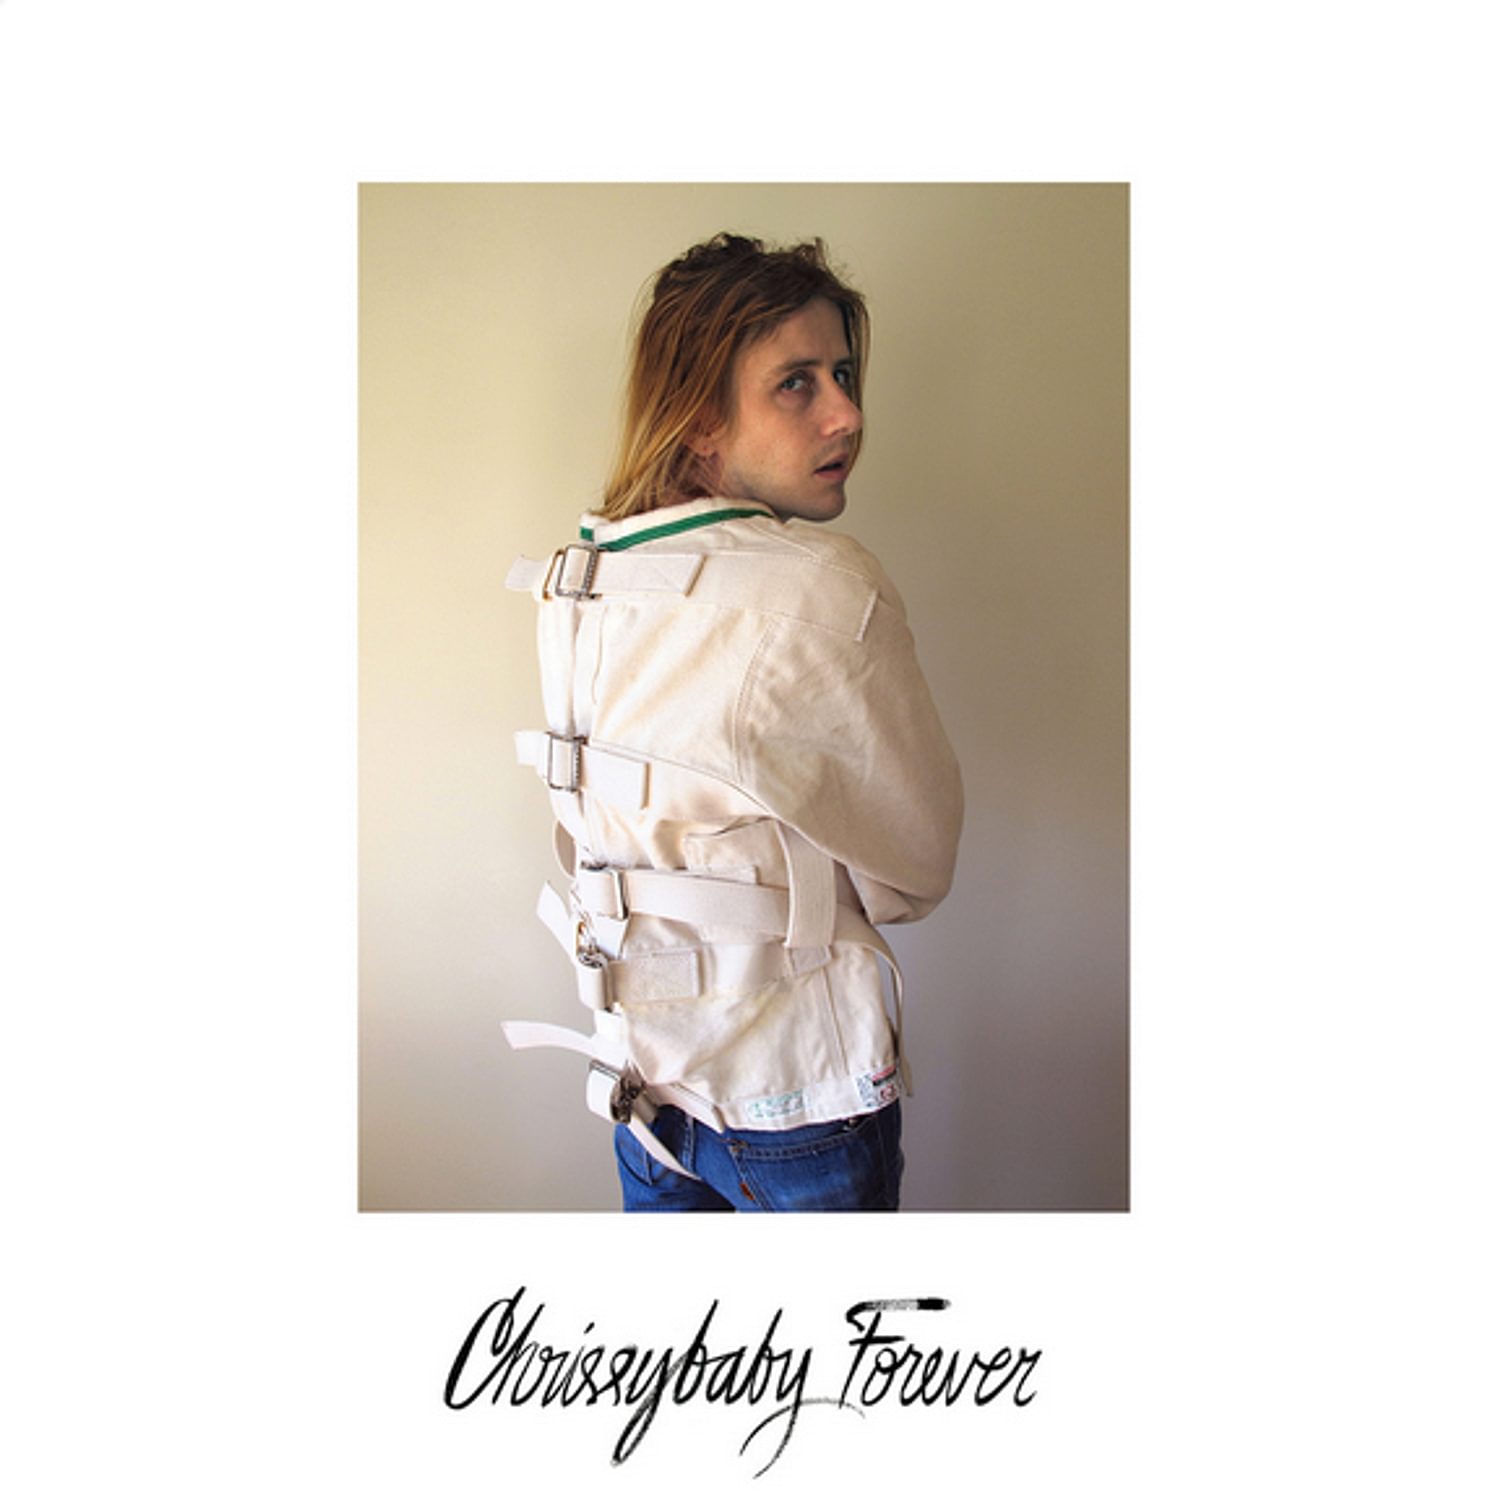 Christopher Owens - Chrissybaby Forever